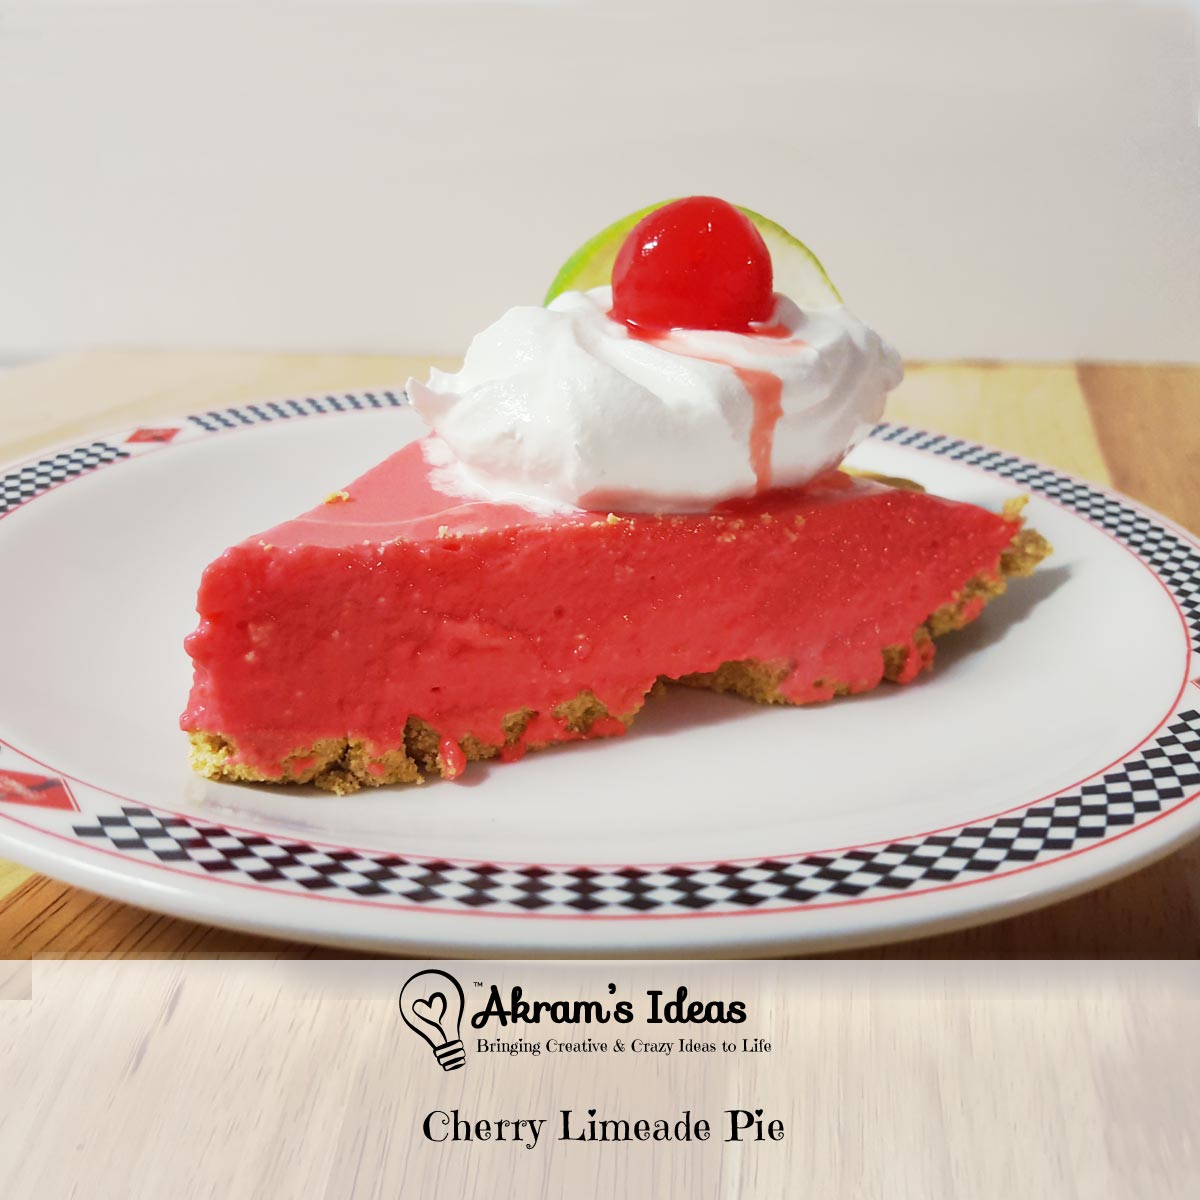 Learn how to take a classic Cherry Limeade and turn it into a Cherry Limeade pie using our Quickie Bake: No-Bake Sugar-Free Key Lime Pie recipe.